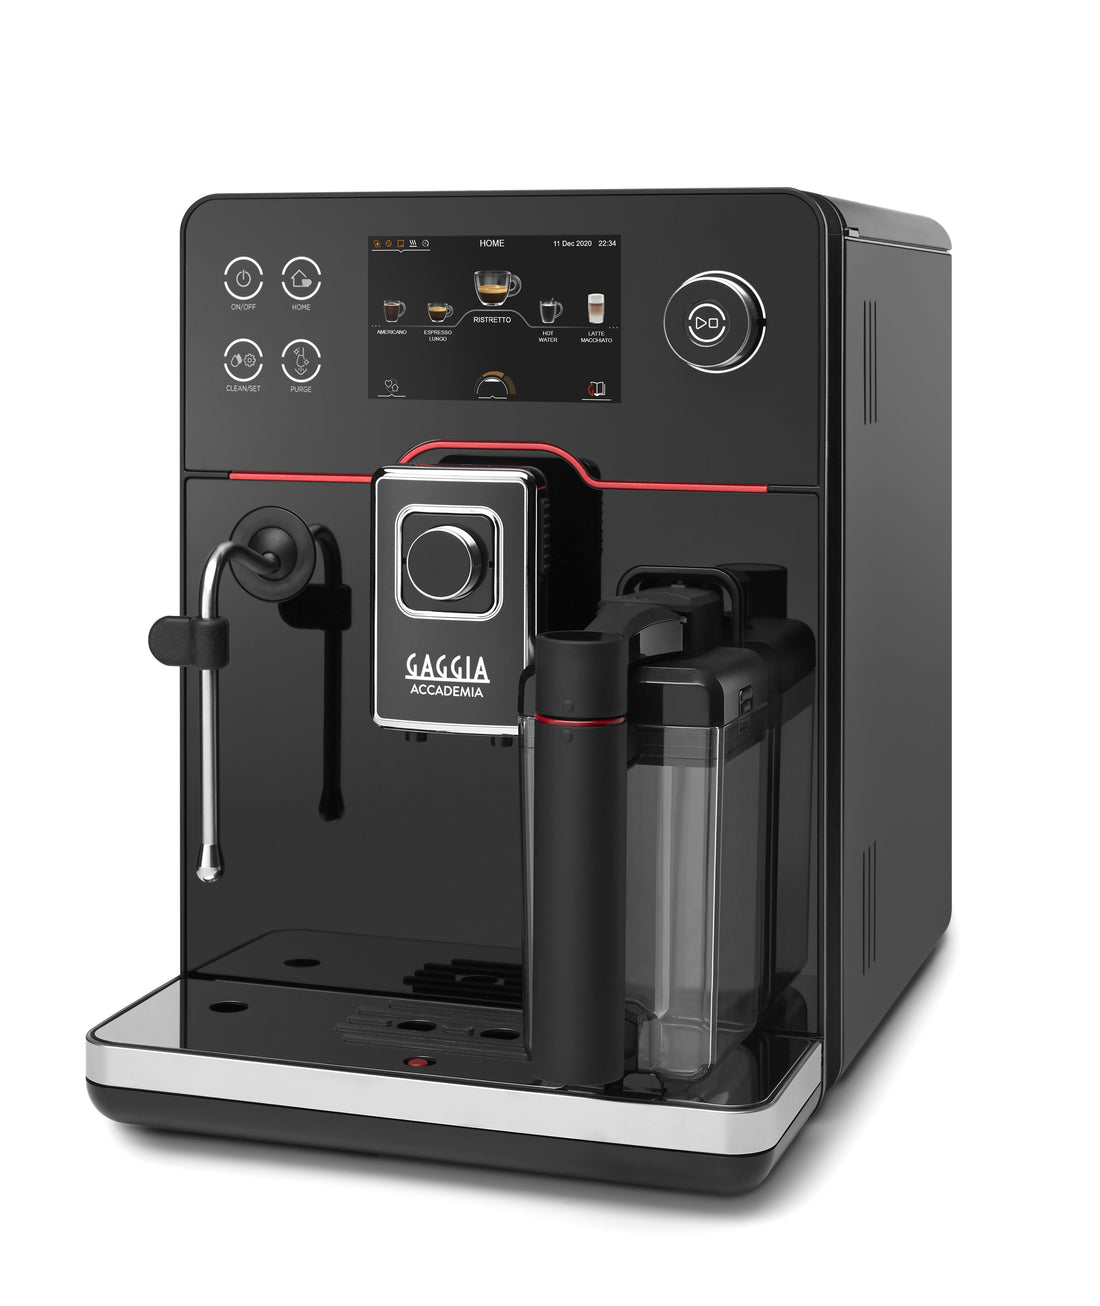 Introducing Touch Screen Office Coffee Machine